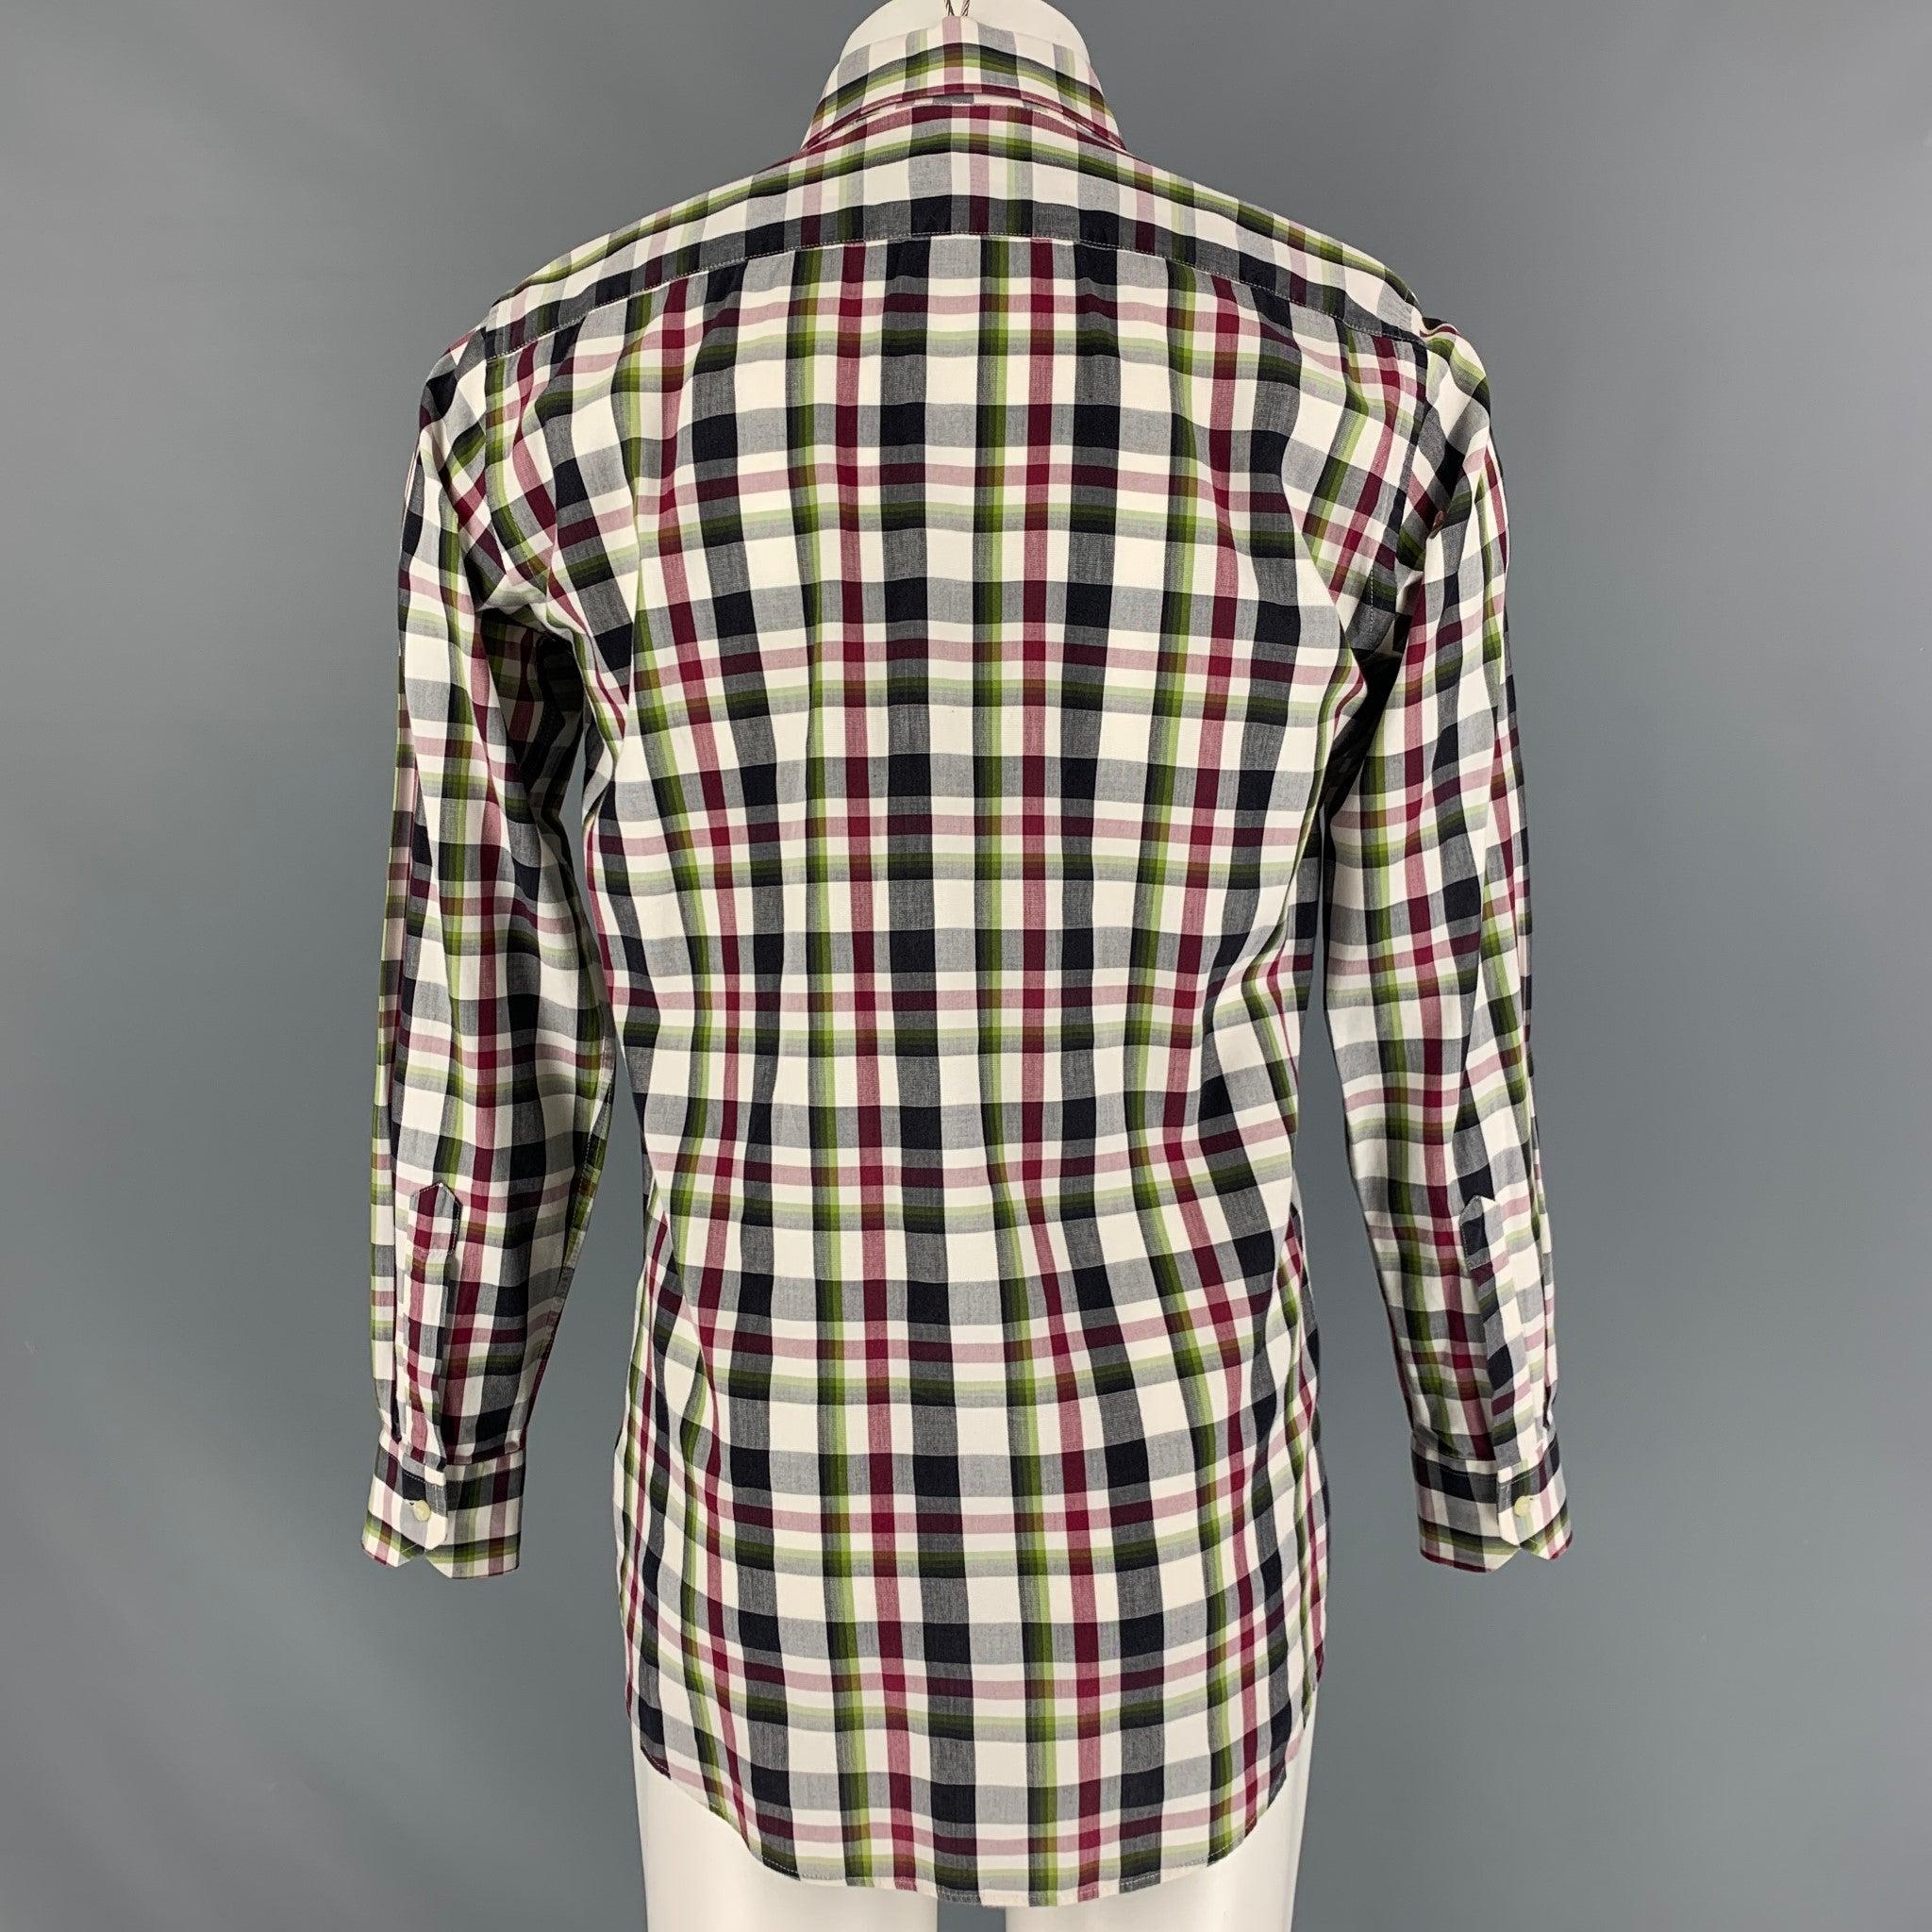 ETRO Size S Multi-Color Plaid Cotton Button Up Long Sleeve Shirt In Excellent Condition For Sale In San Francisco, CA